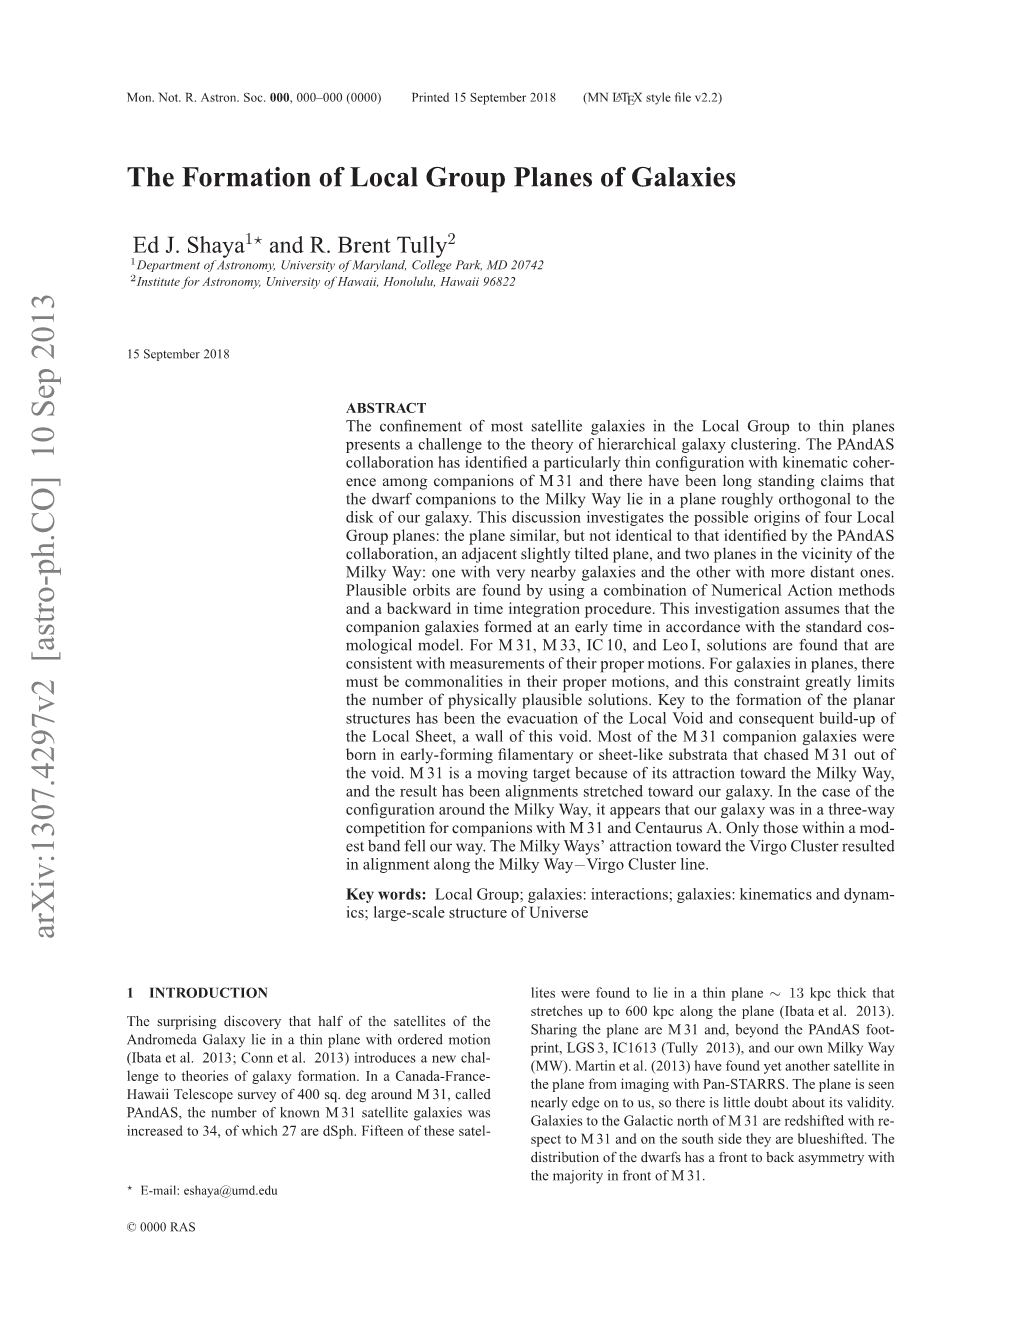 The Formation of Local Group Planes of Galaxies